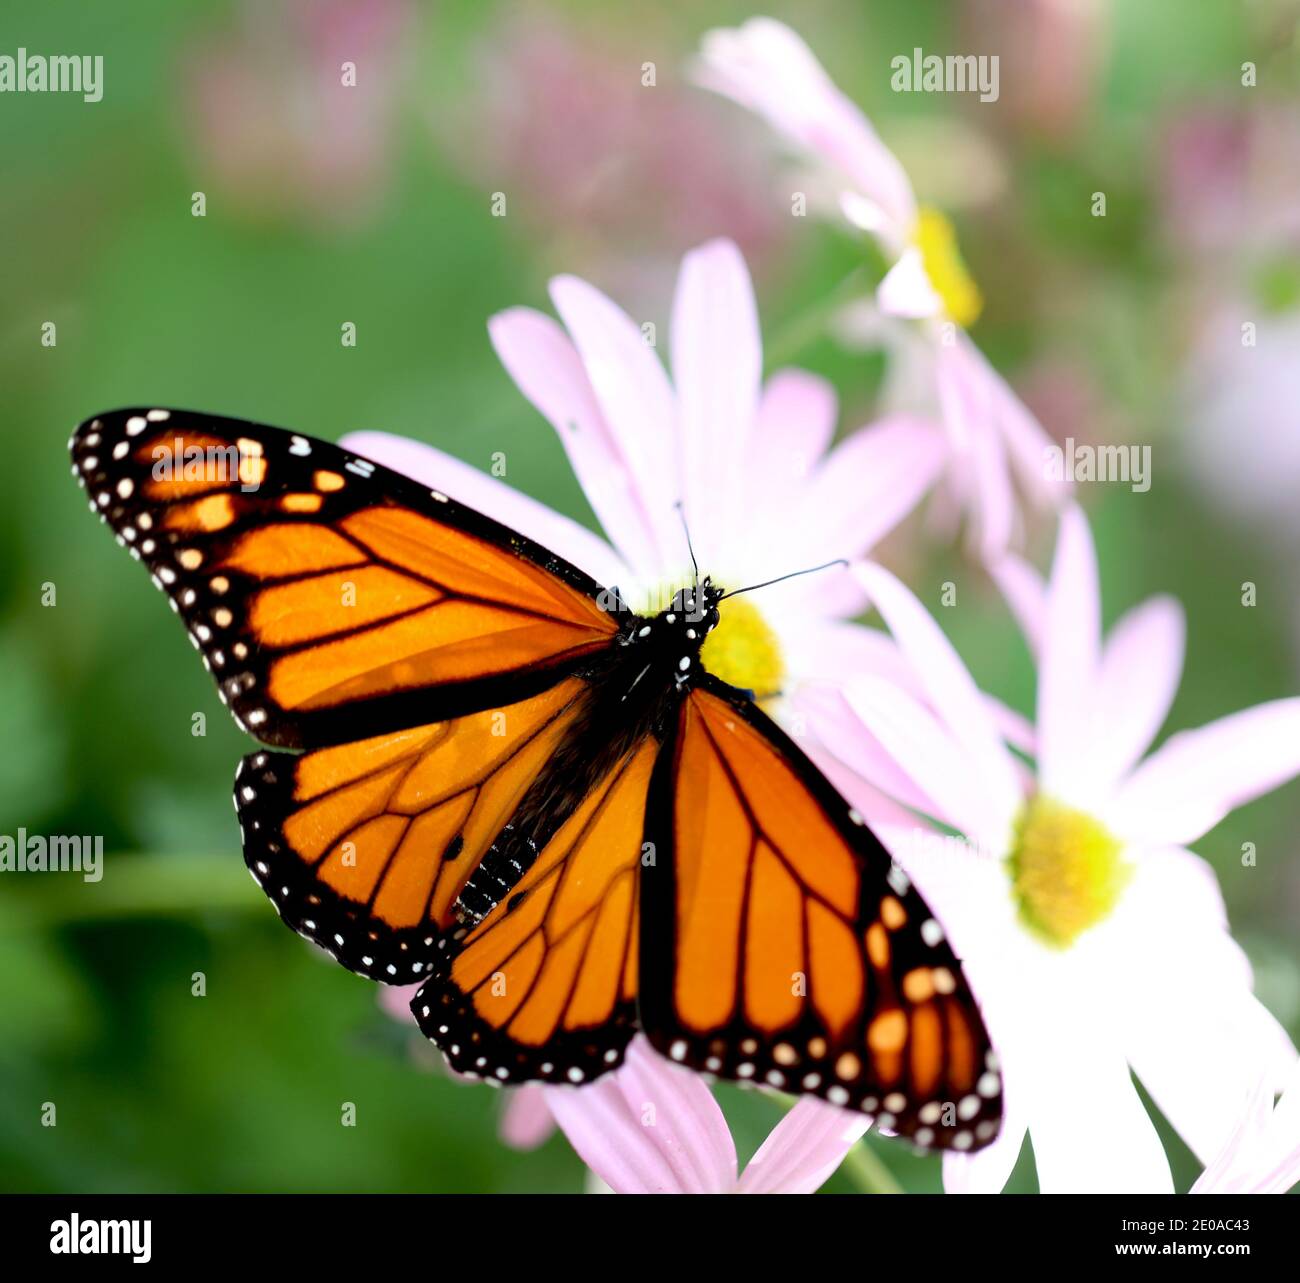 Monarch Butterfly on Pink Daisies Stock Photo